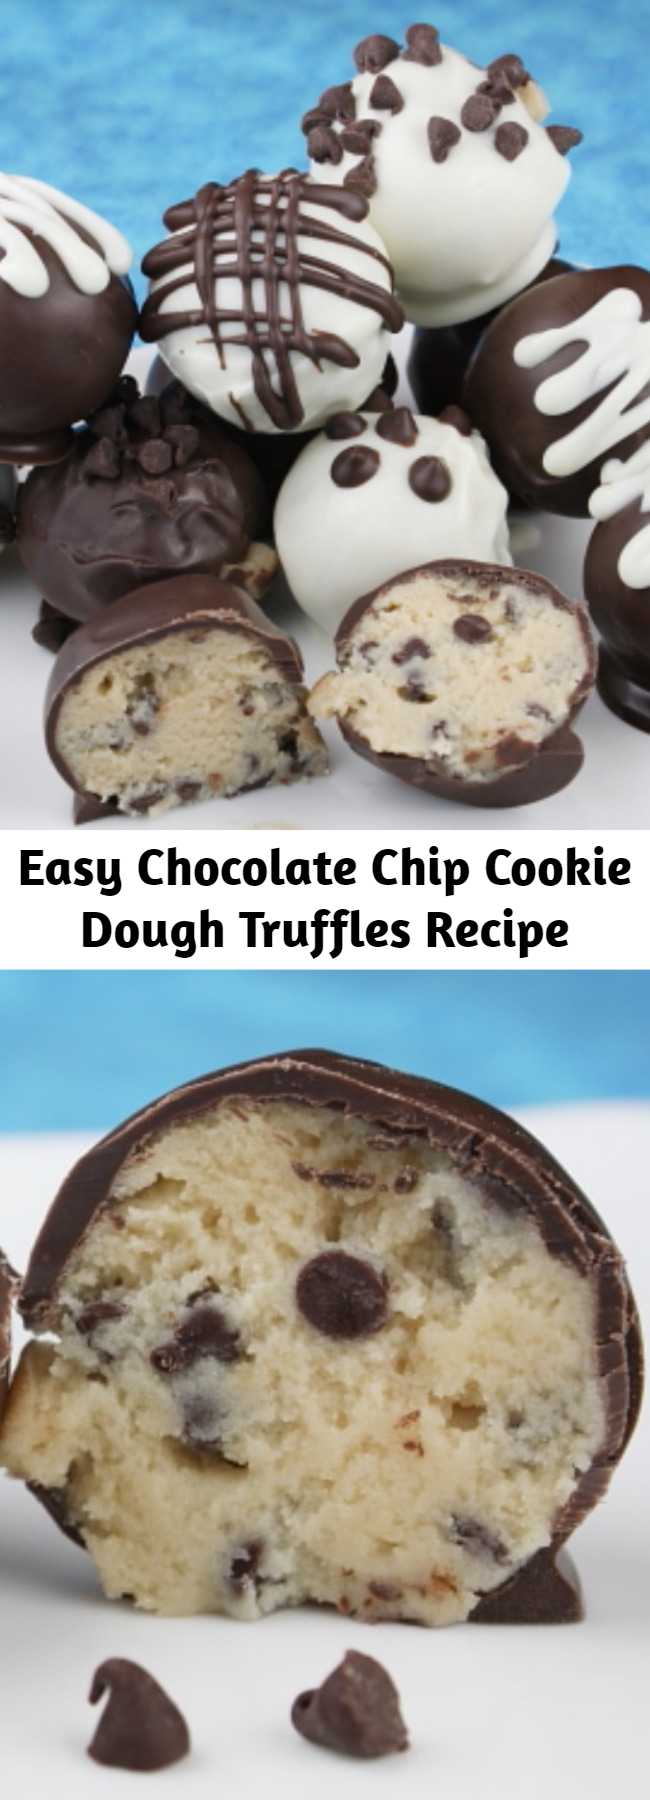 Easy Chocolate Chip Cookie Dough Truffles Recipe - These Chocolate Chip Cookie Dough Truffles are little bites of egg free chocolate chip cookie dough covered in a chocolate coating. SO GOOD.